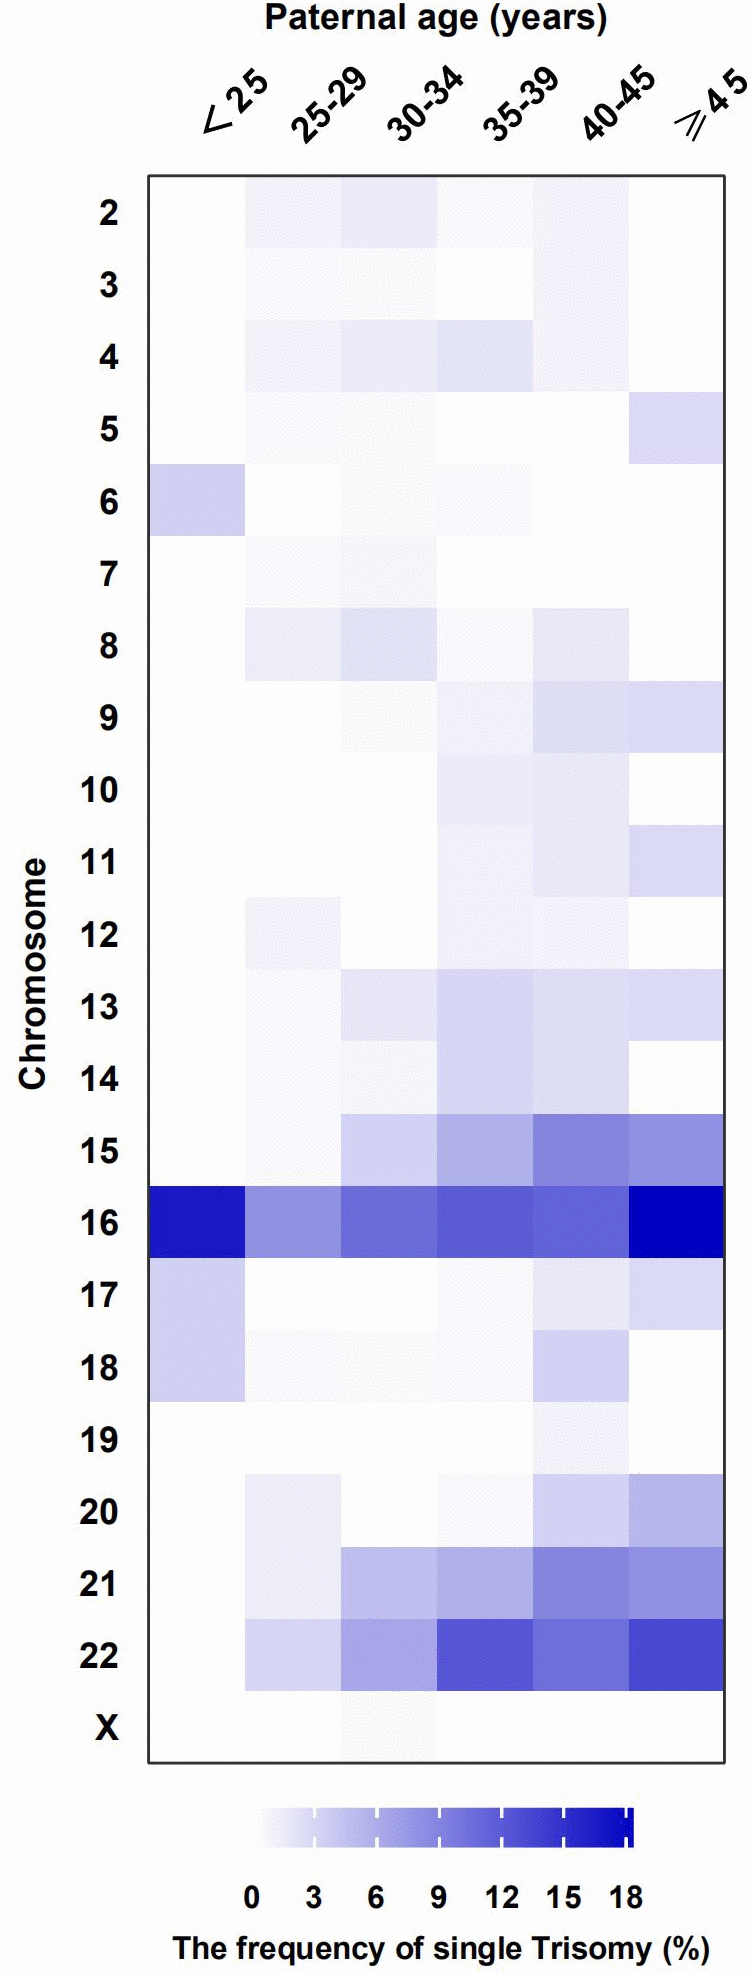 The distribution of frequency in single Trisomy by paternal age groups. Frequency of chromosomes (aneuploid: trisomy) in different paternal age groups are represented by a colour gradient, in the heat map.